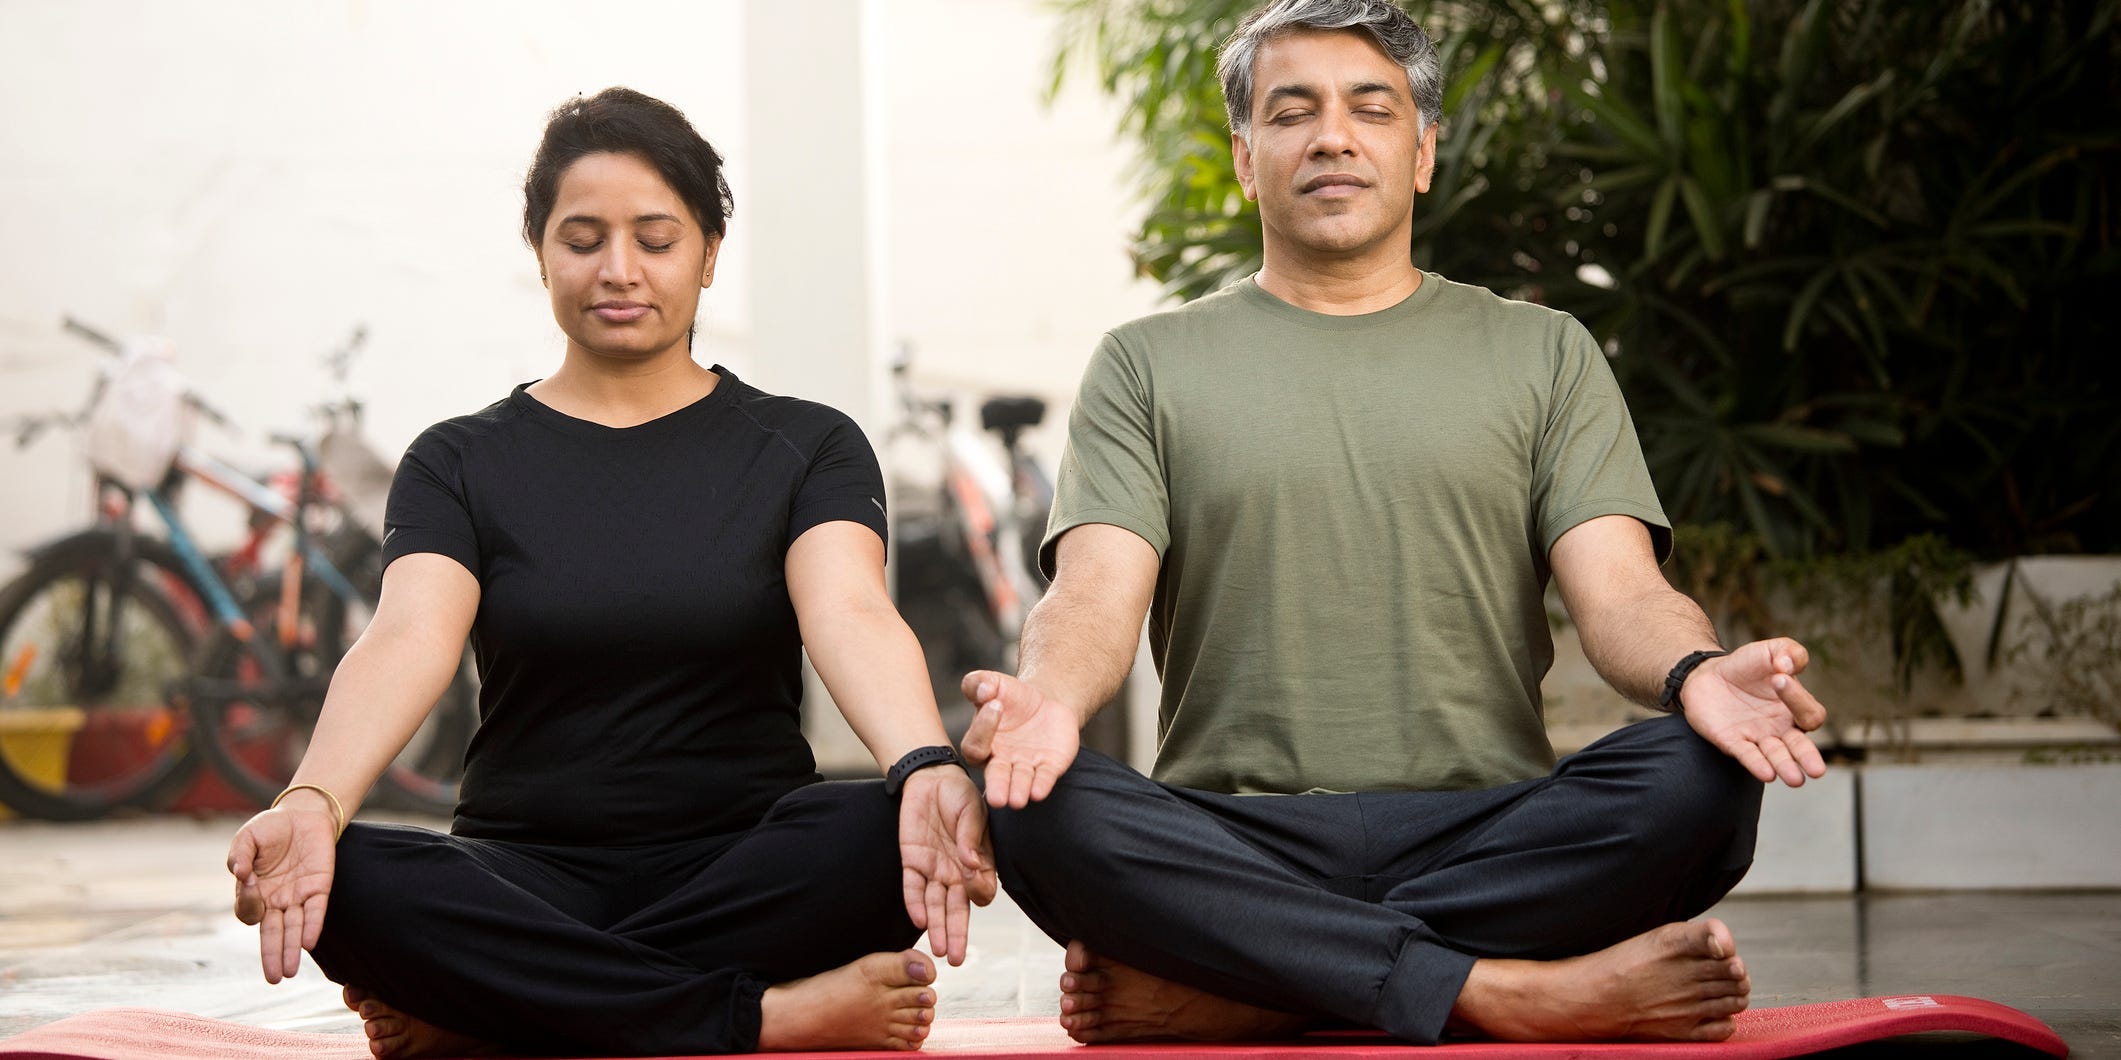 A couple sits in a meditative pose breathing together.